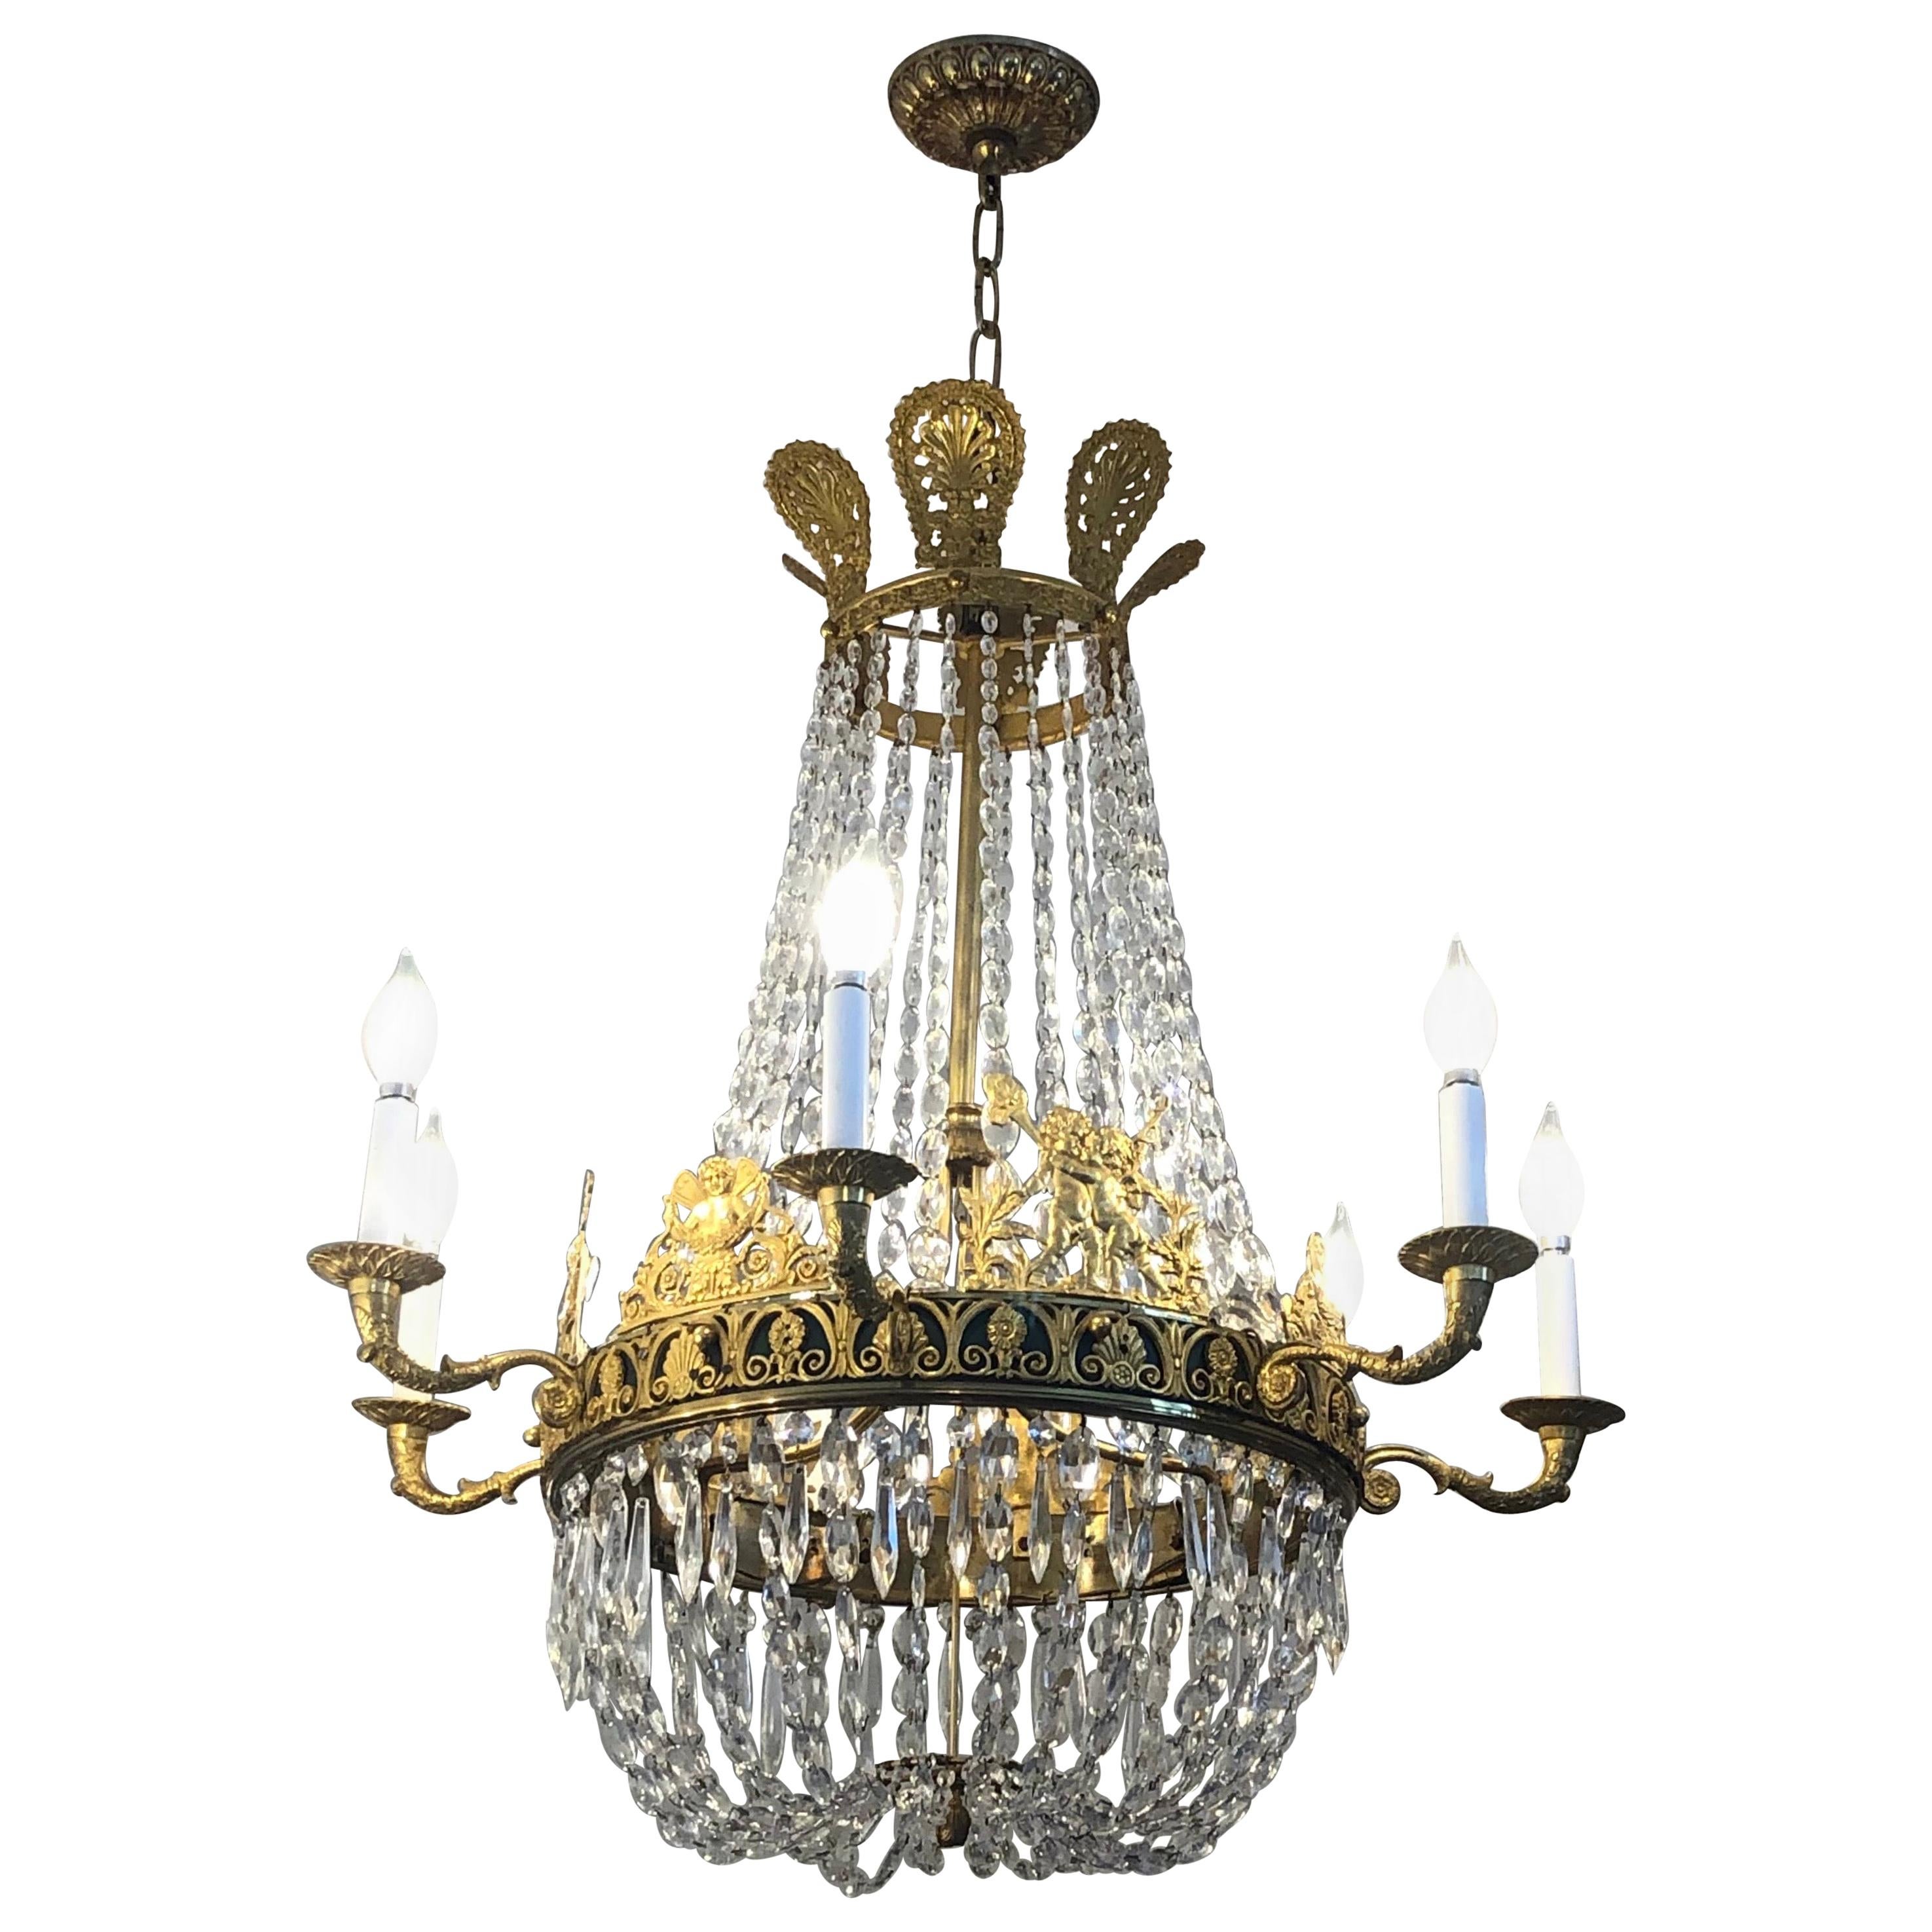 French Empire Ormolu and Crystal 7-Arm Chandelier, 19th Century For Sale